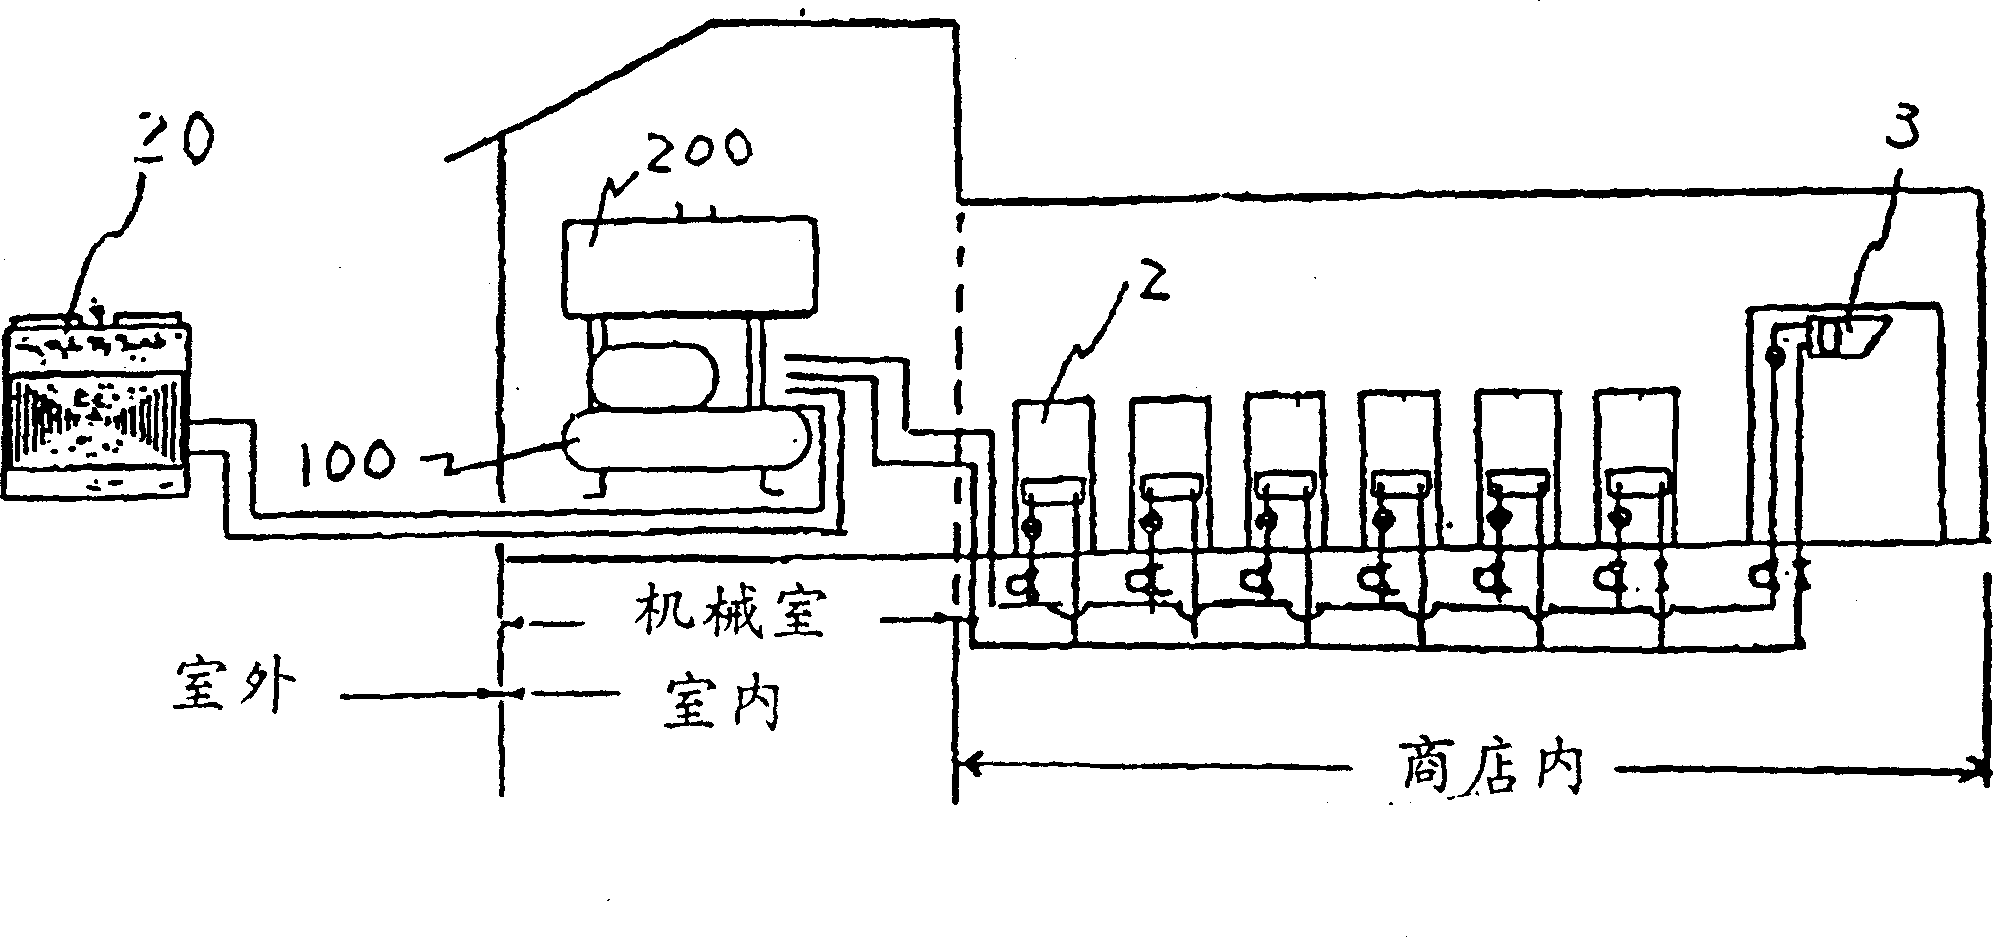 Refrigerator system for store